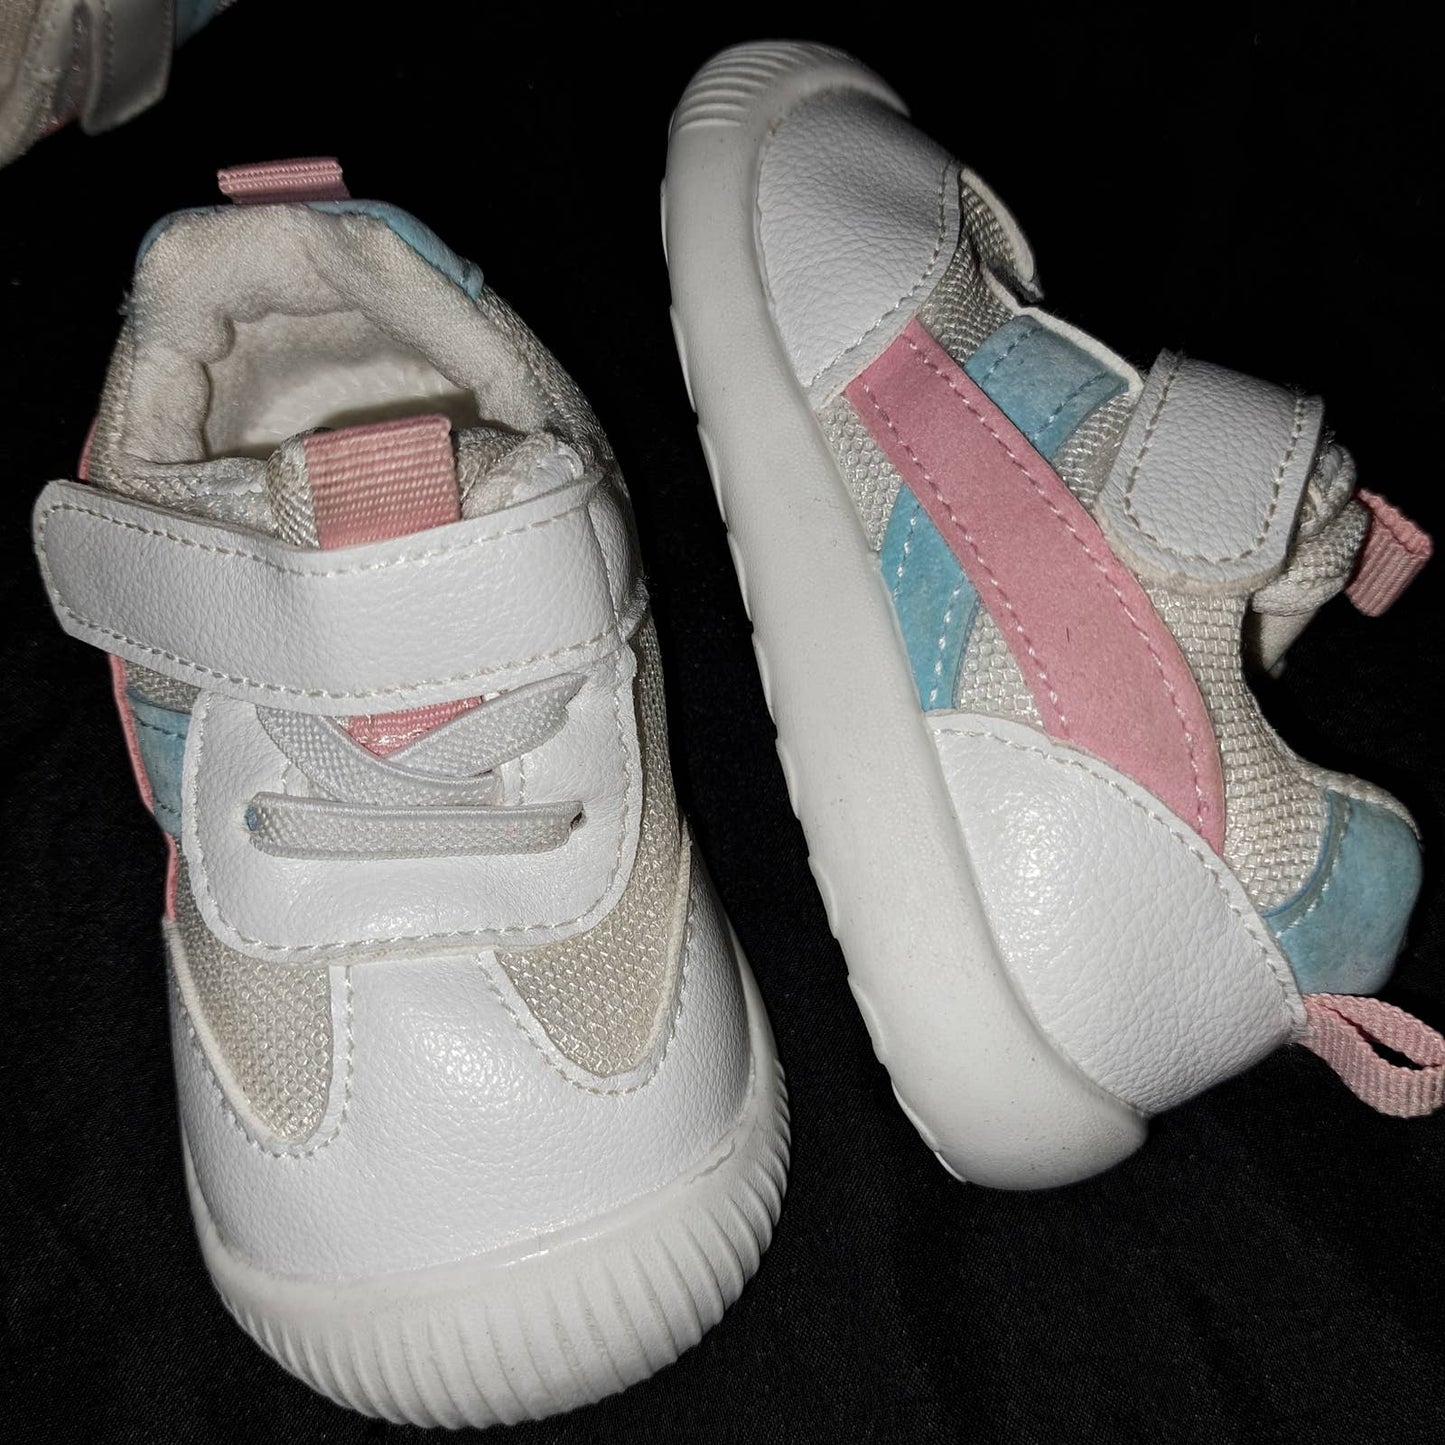 NEW MK Baby Shoes White Blue and Pink Stripes SZ 16 EU Baby